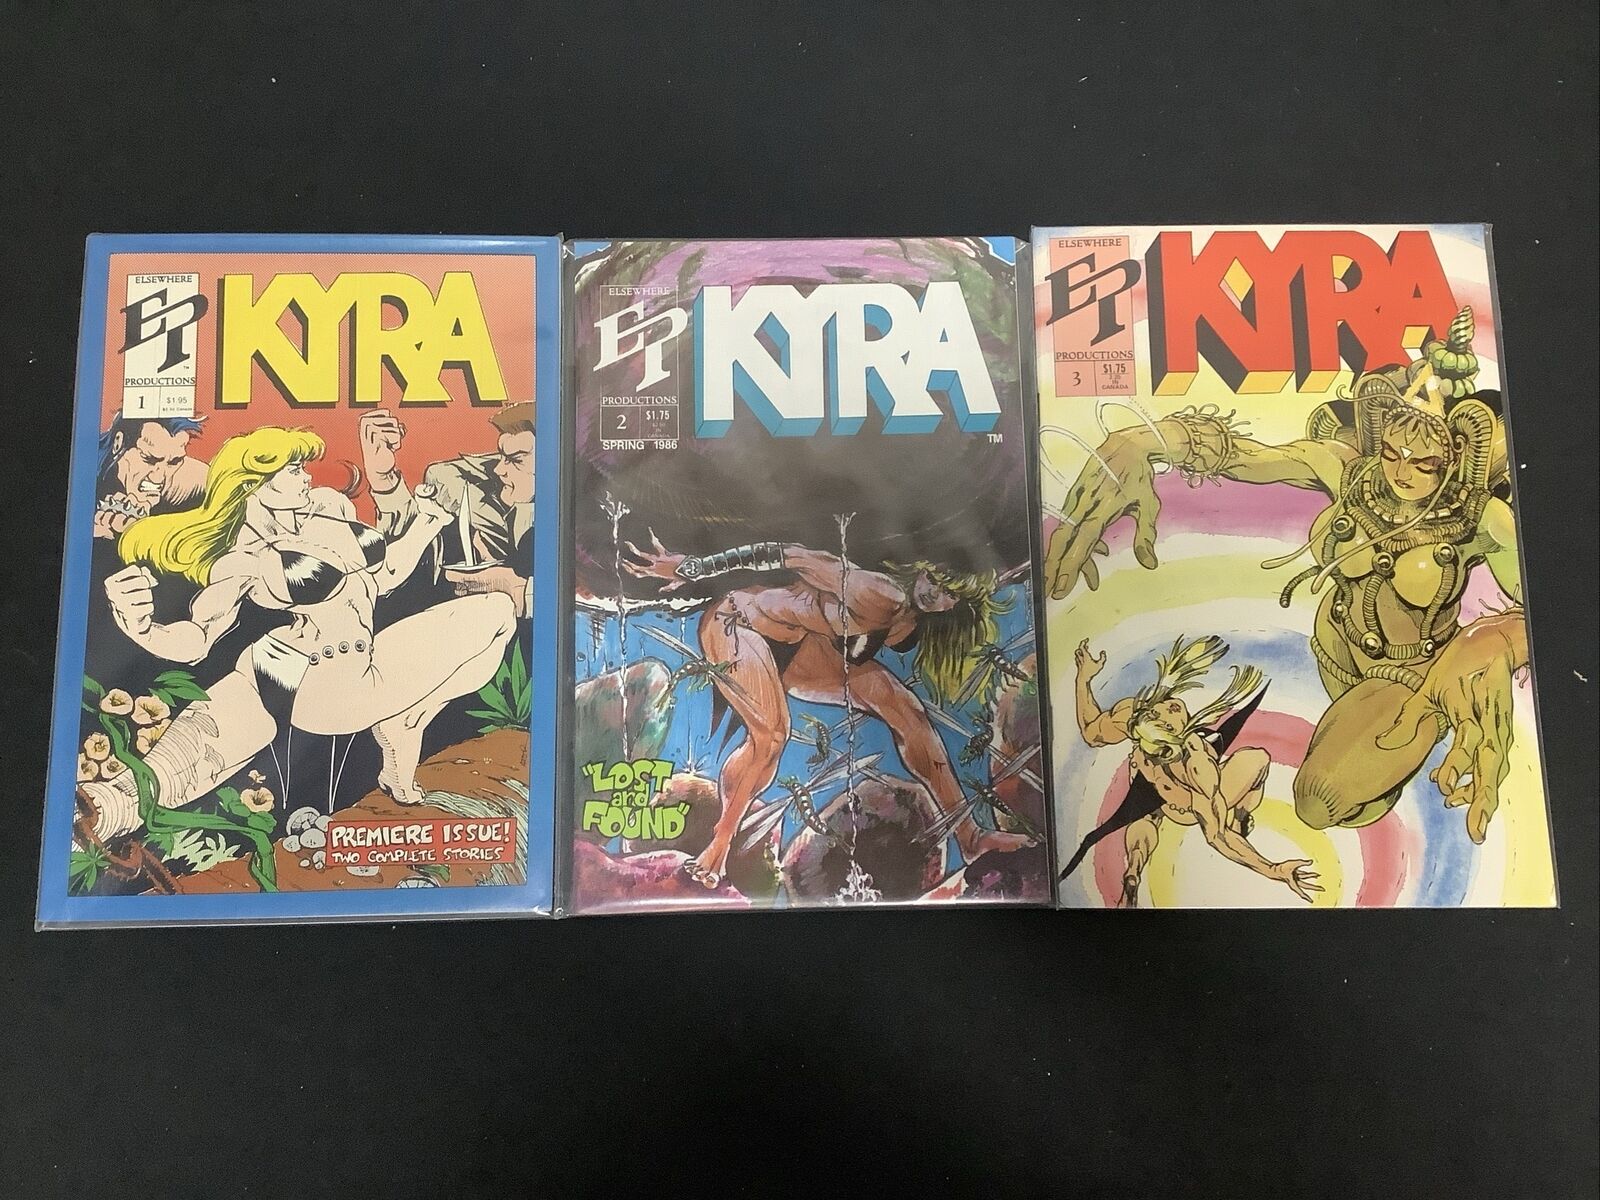 Kyra #1-3 Comic Lot, Misters Of The Jungle, Elsewhere Productions, 1985-1987